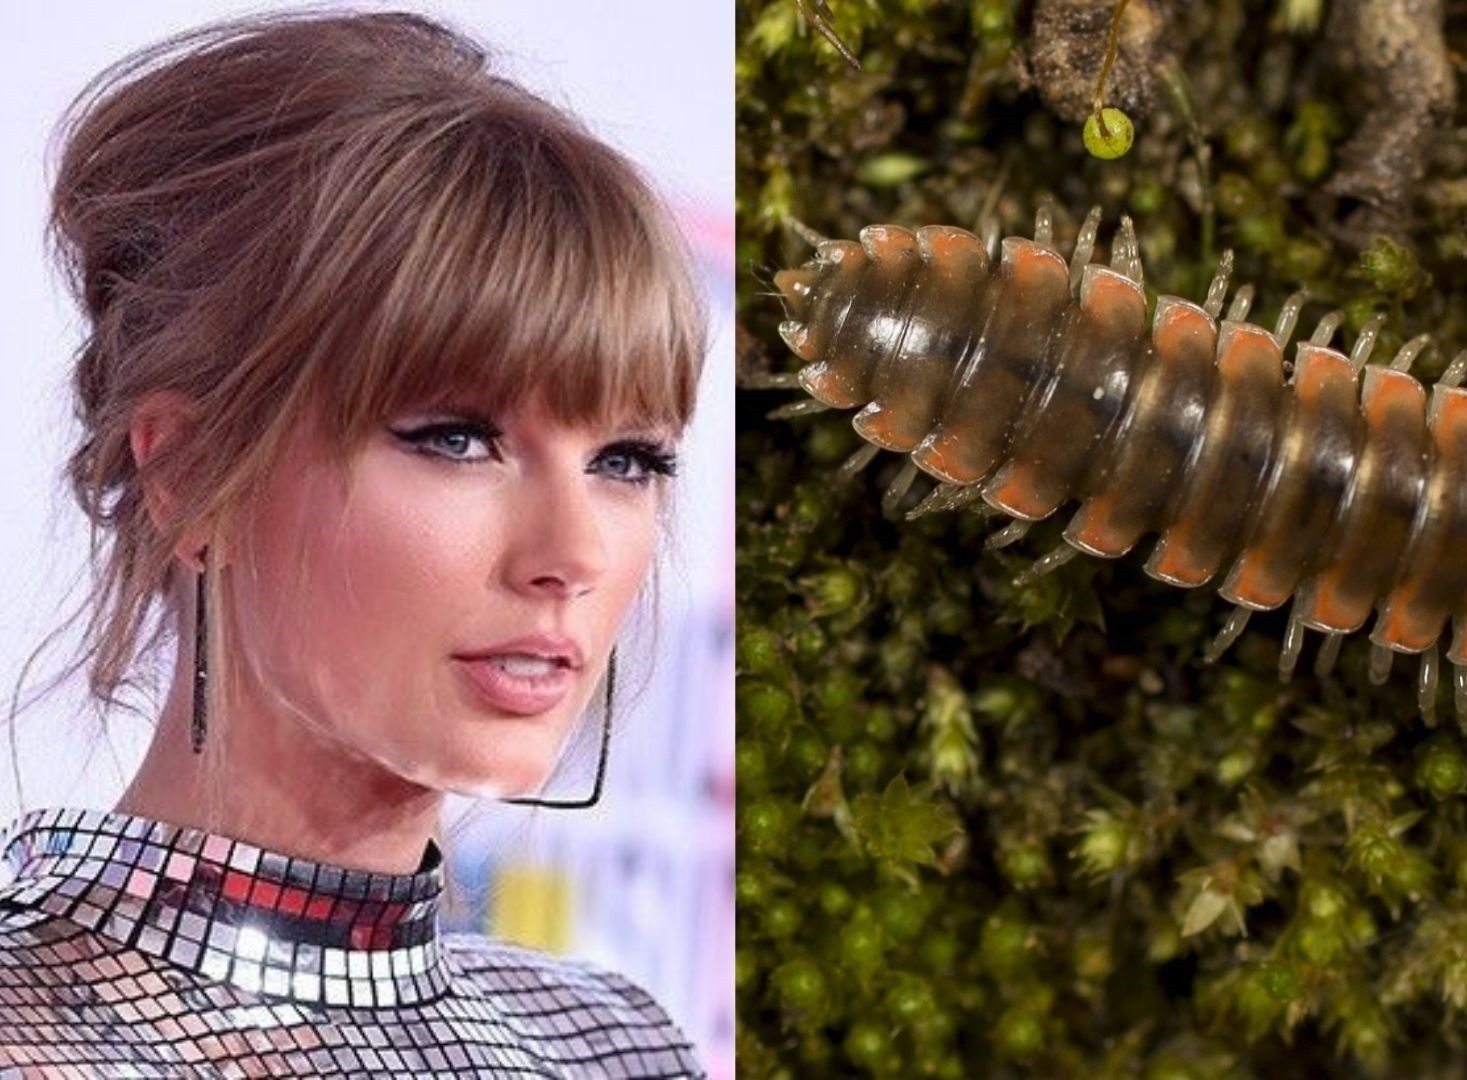 Scientist names new millipede species after Taylor Swift